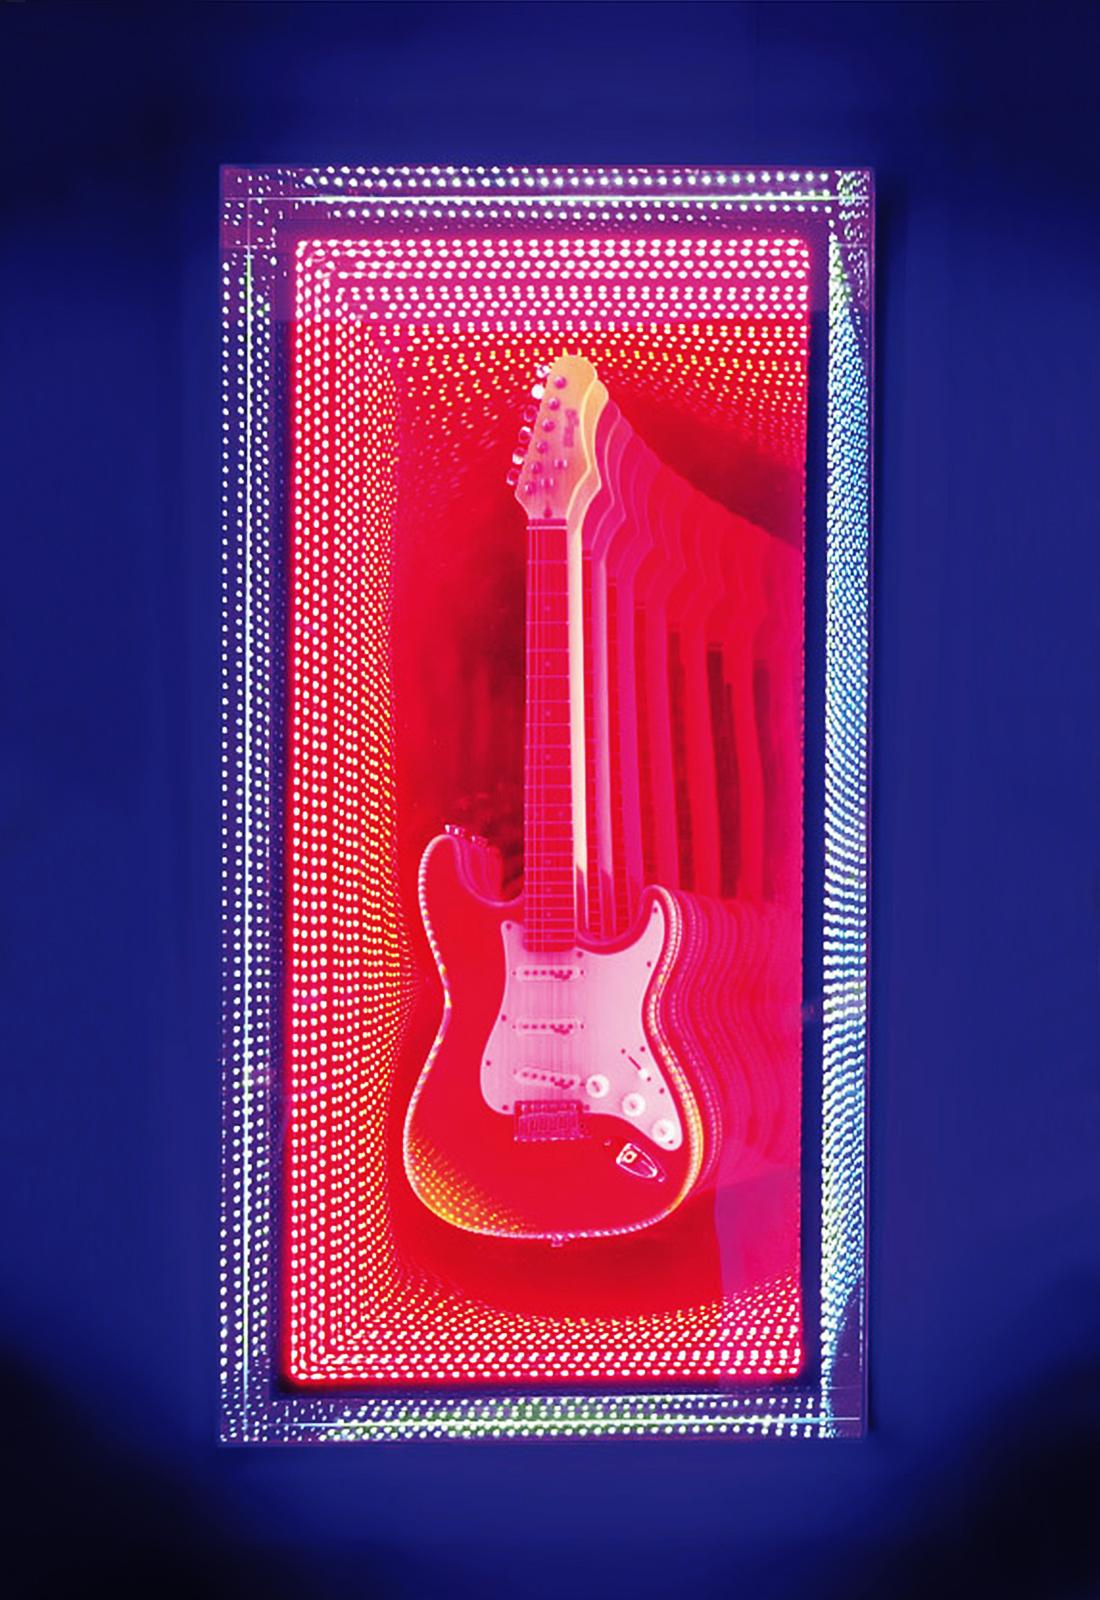 Wall decoration mirror guitar Infiny made with
mirrored led lights with glass and plexiglass creating
an infiny mirrored effect. With original and exceptional
guitar style Fender Stratocaster.
Exceptional piece made in France in 2019 by Raphael